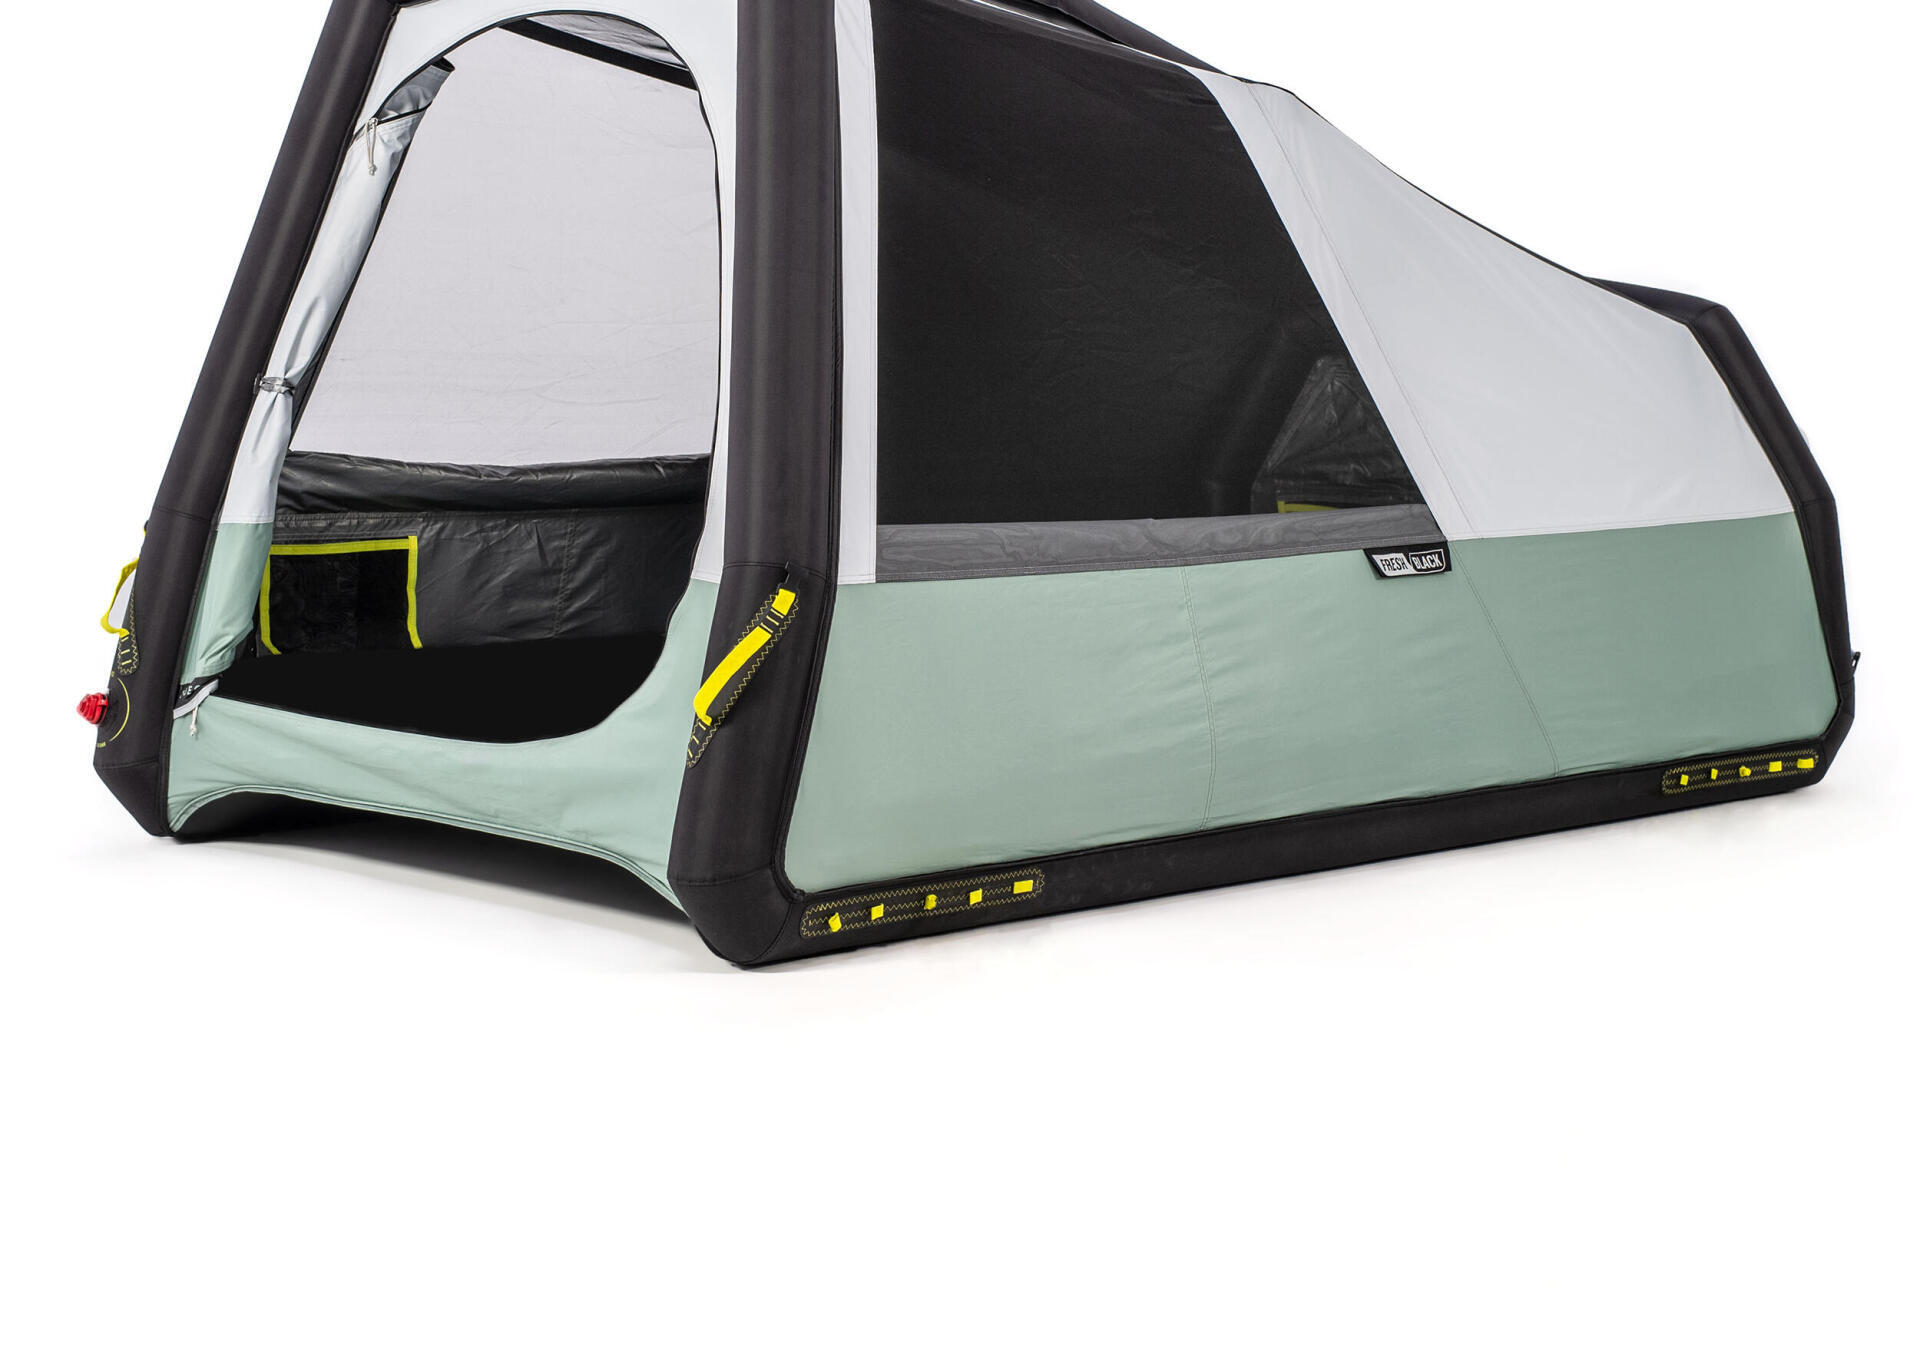 VAN 500 roof top tent inflatable bedroom and tube 